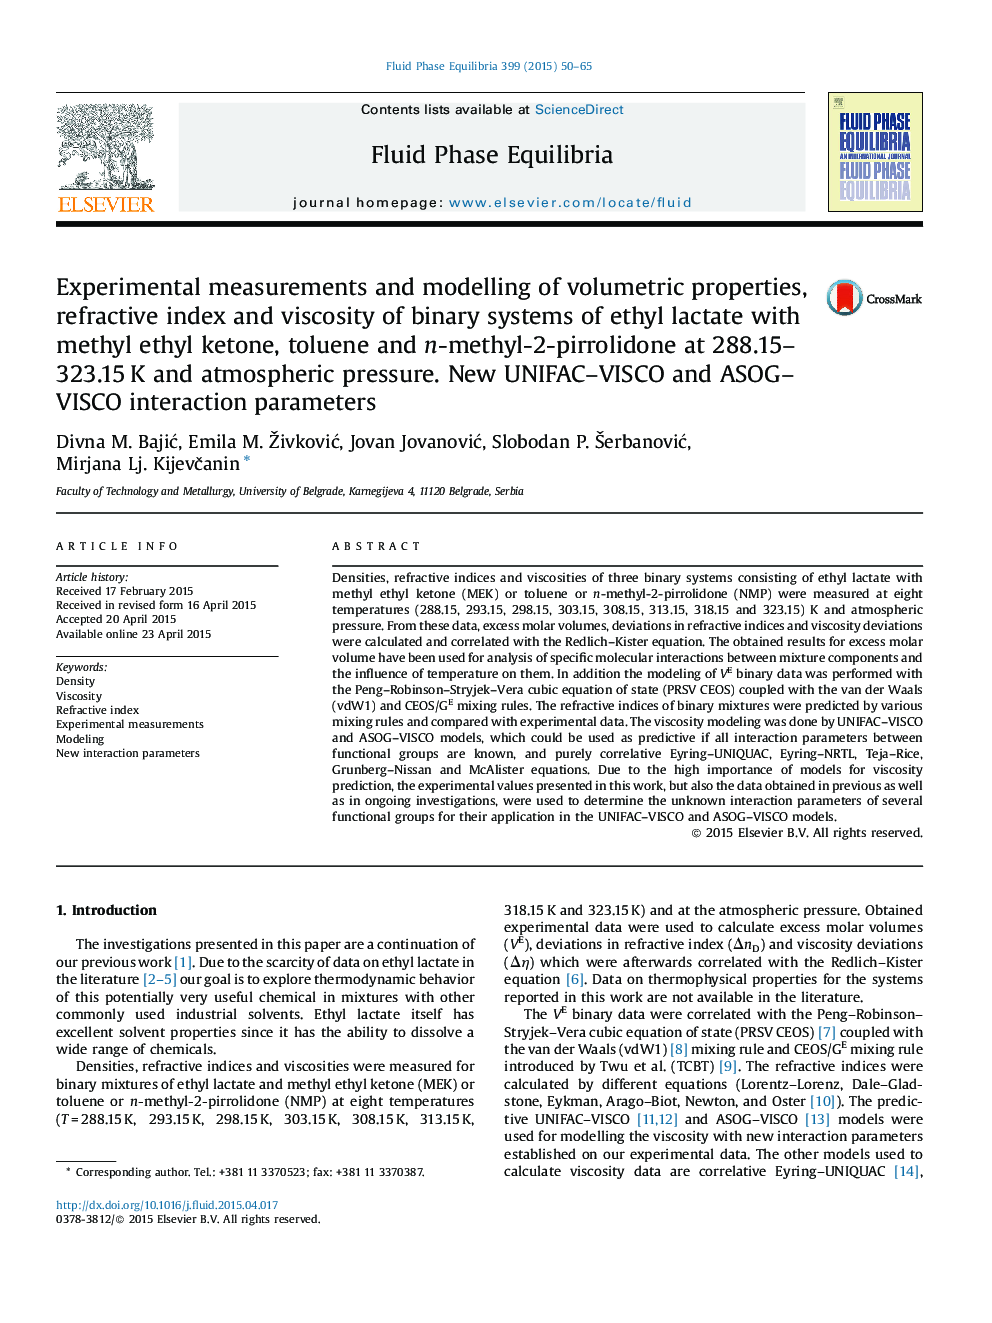 Experimental measurements and modelling of volumetric properties, refractive index and viscosity of binary systems of ethyl lactate with methyl ethyl ketone, toluene and n-methyl-2-pirrolidone at 288.15–323.15 K and atmospheric pressure. New UNIFAC–VISCO 